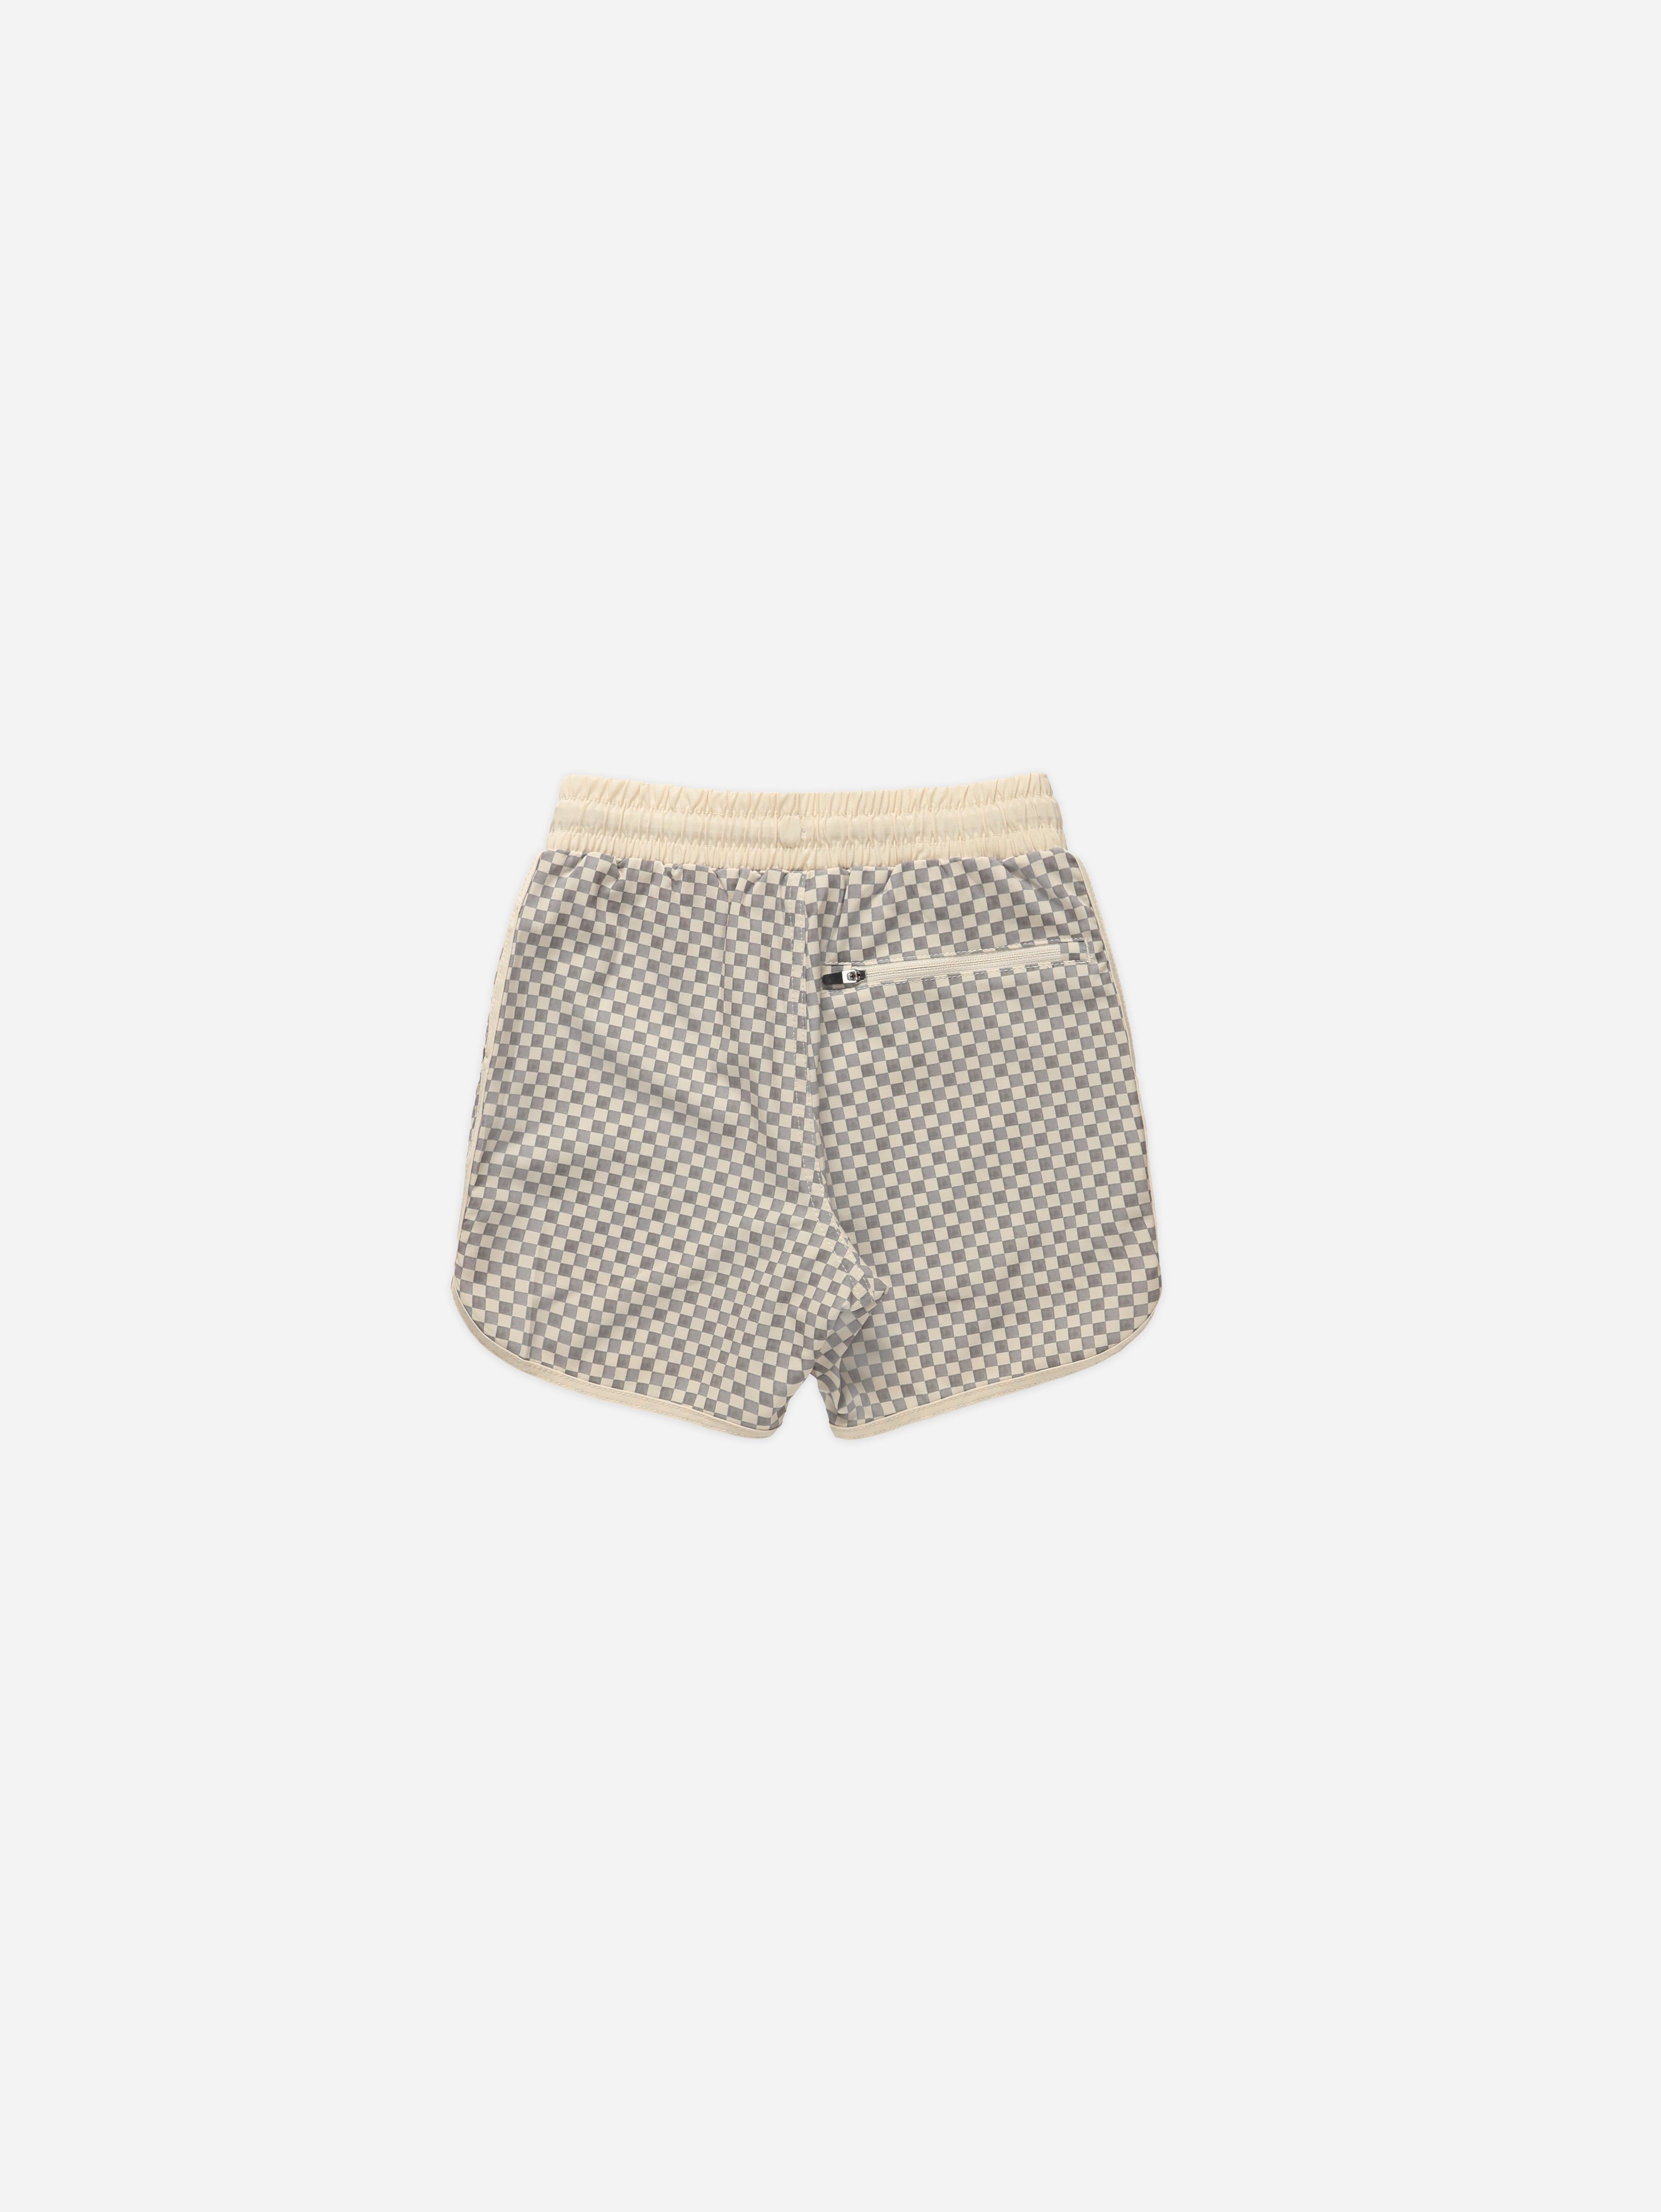 Del Mar Short || Grey Micro Check - Rylee + Cru | Kids Clothes | Trendy Baby Clothes | Modern Infant Outfits |